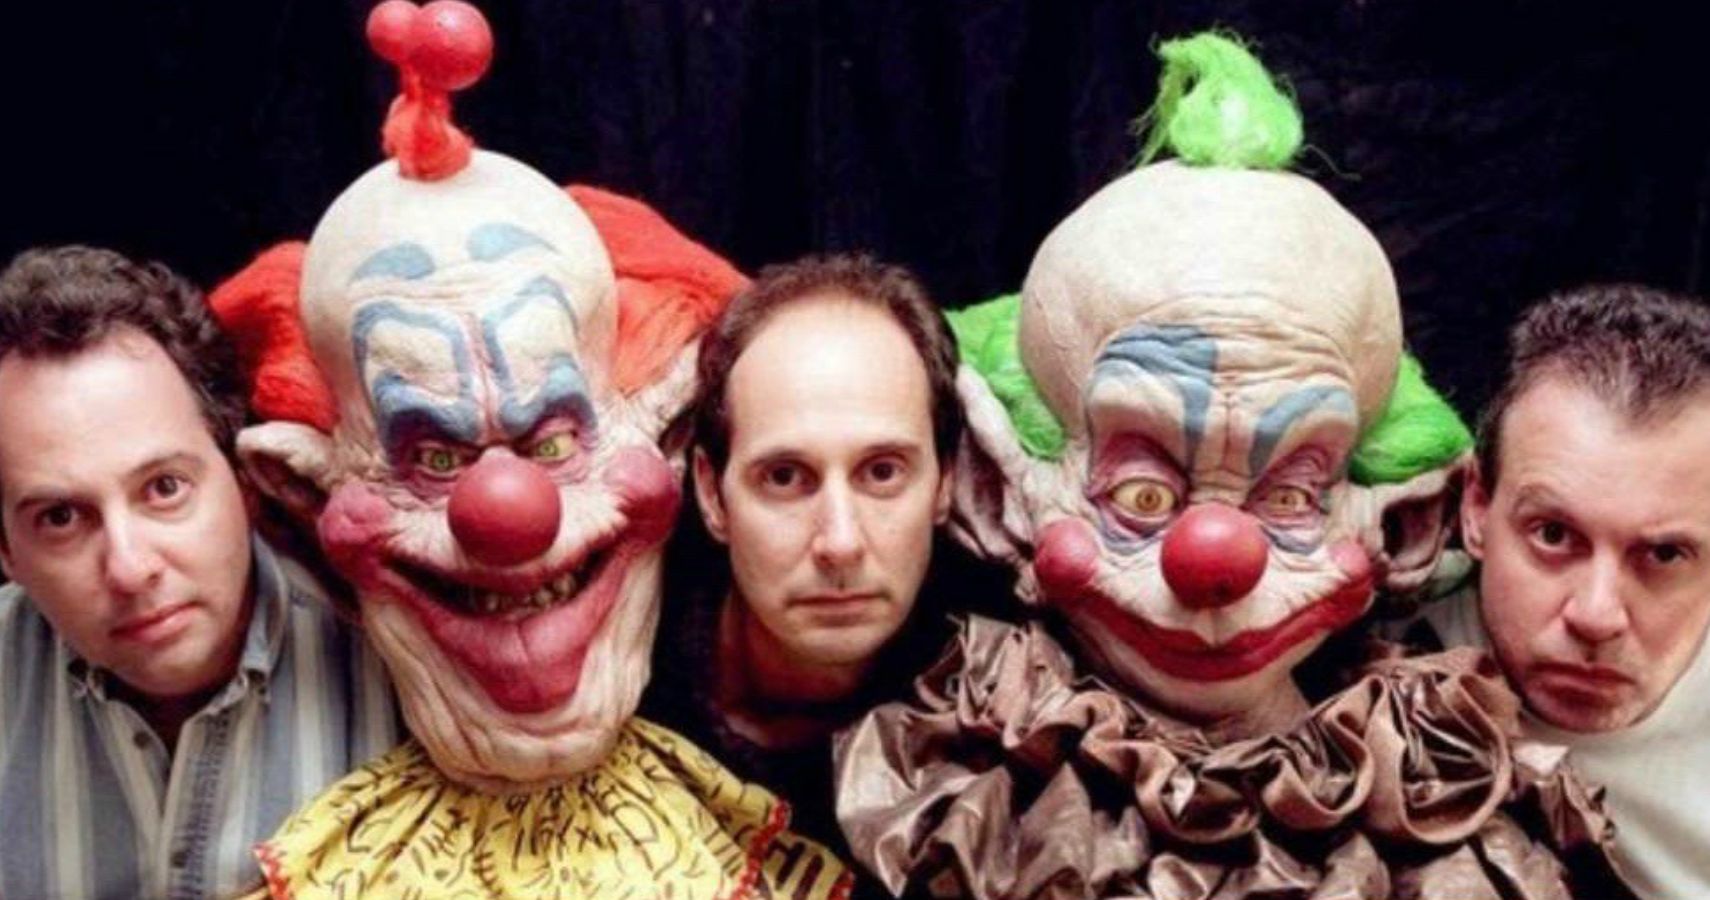 10 Things You Didn’t Know About Killer Klowns From Outer Space